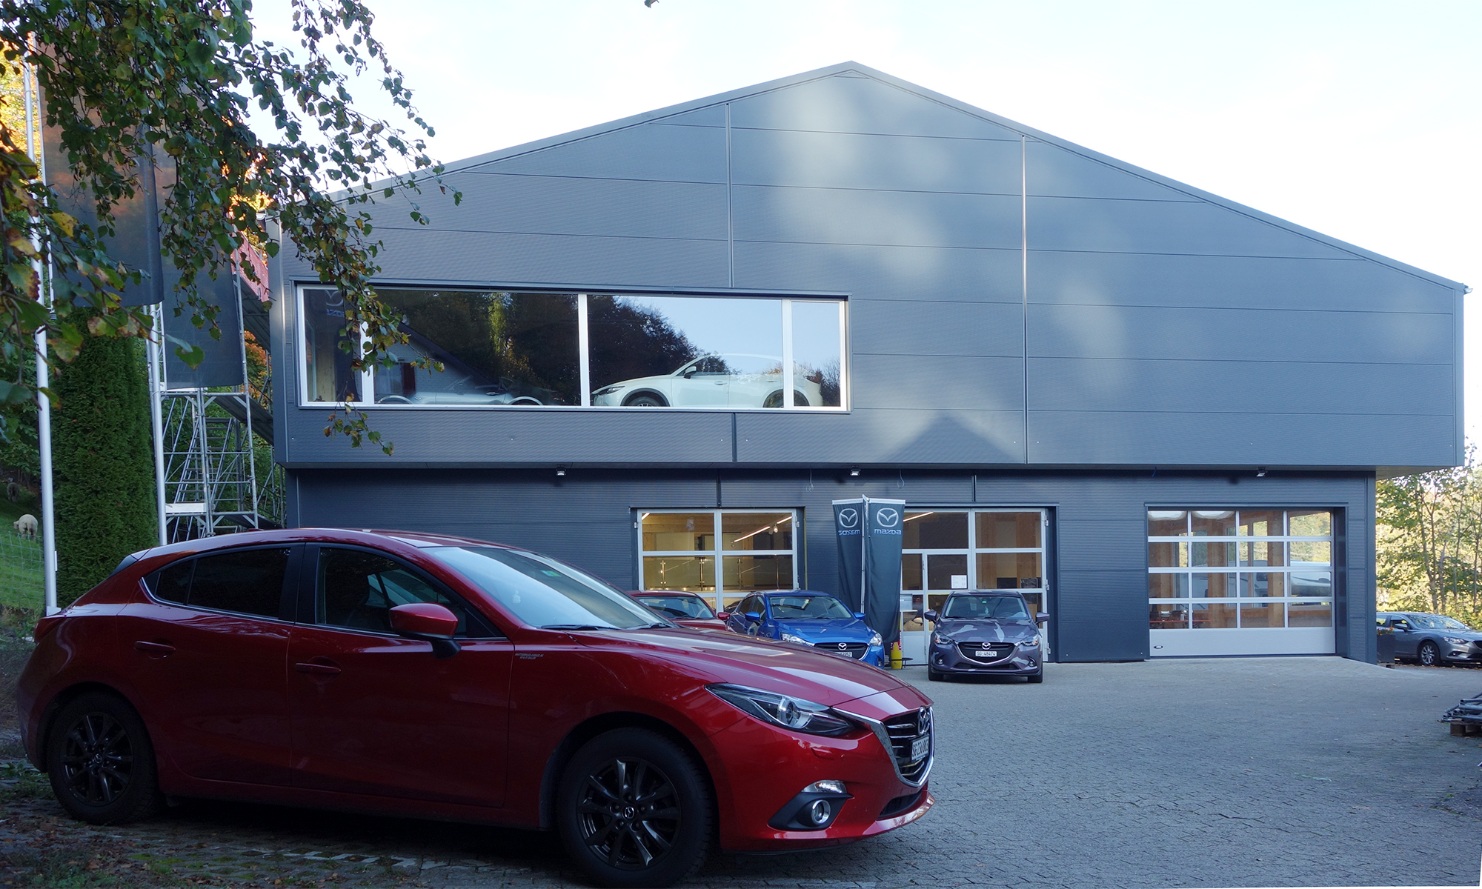 Overall view of the Mazda garage with car parked in front 